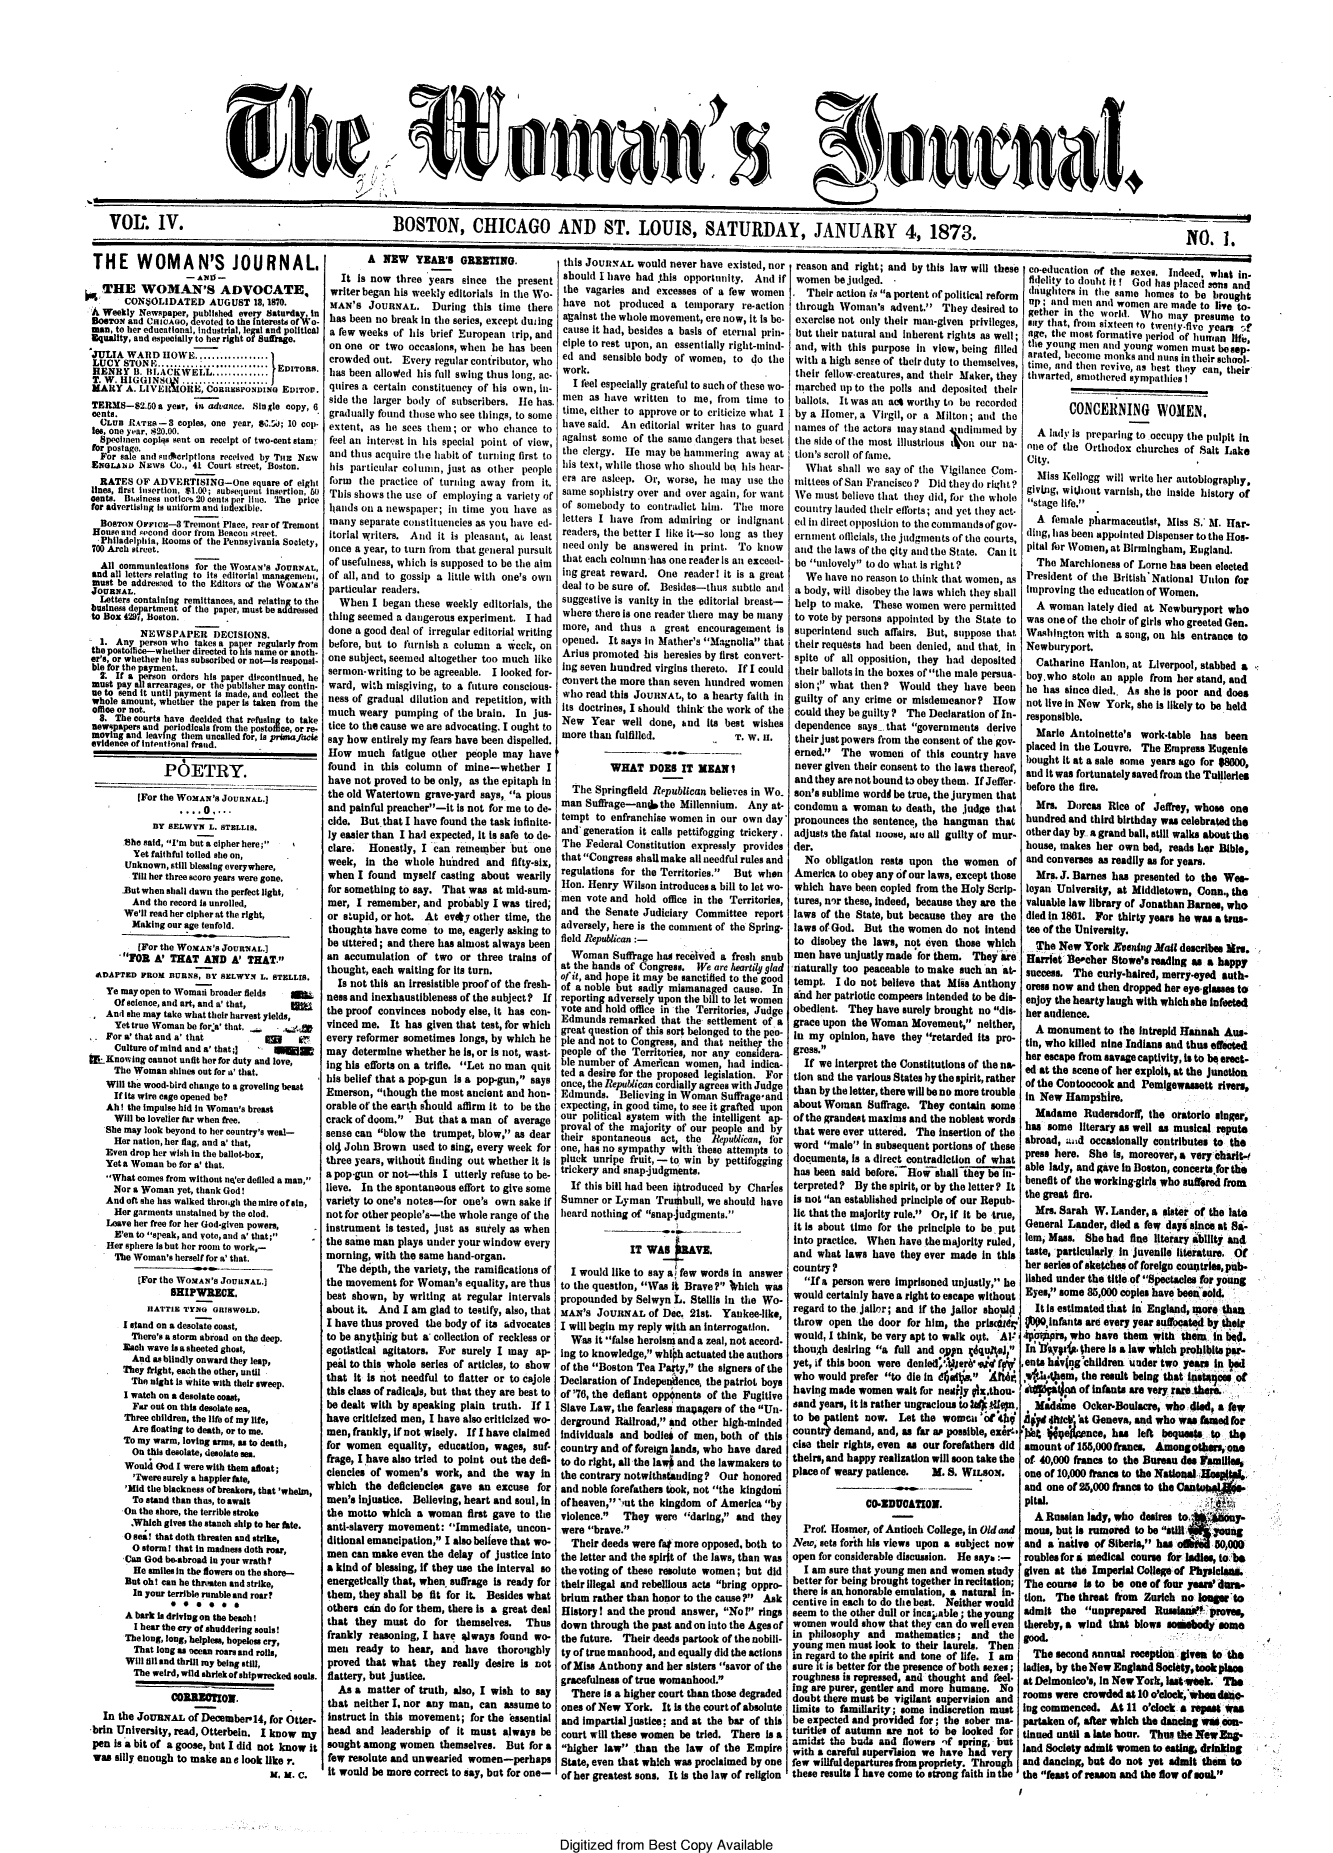 handle is hein.journals/wmjrnl4 and id is 1 raw text is: 







CIS


BOSTON, CHICAGO AND ST. LOUIS, SATURDAY, JANUARY 4, 1873.


THE WOMAN'S JOURNAL,
                   _AN-
   THE WOMAN'S ADVOCATE,
       CONSOLIDATED AUGUST 18, 1870.
 A Weekly Newspaper, publishled every Saturday in
 BosTox and CmCAo,  devoted to the faterest, ofWo-
 man, to her educational, Industrial, legal and political
 Squality, and especially to her right of Smntkage.
 JULIA WARD   HOWE.......-.....
 LUCY STON-F    --ci --i-i-------   EDITORS.
 HENRY   iB. BLtACWELL-----------a..
 T. W. HIGGINS(N  ........--.......
 MARY  A. LVEltORE, Coau'sroNeo ErrITO.
 TERMS-2.50  a year, in advance. Single copy, 6
 cents.
 CLUa   RATES-3  Copies, One year, 84'.W ; 10 cop.
 leS, one year, 820.00.
 Speolmen  coplqs sent on receipt of two-cent stam
 for postage.
 For  sale and authorptons received by TaE Nw
 ENeA     Nws   Co., 41 Court street, Boston.
 RATES   OF  ADVERTISING-One square   of eight
 lines, first isertion, $1.00; subsequent insertion, 0
 cents. Baustness noticea 20 cents per Hue. The price
 for advertising is uniform and inexible.
 BOSTON  OFFICE-8  Tremnt Place, rear of Treaont
 House and wceond door from Becon street.
 Philadelphia, Itooms of the Pennsylvania Society,
 700 Arch street.
 All  communications for thie WorAx's JOURNAL.,
 and all letters relating to Its editorial managenmem,
 must be addressed to the Editors of the WOMAN'S
 JOURNAL.
 Letters containing remittances, and relating to the
 businessi department of the paper, must be addressed
 to Box 429, Boston.
          NEWSPAPER DECISIONS.
  1. Any  person who takes a paper regularly from
thepOetotIlee-whether directed to lis name or anoth-
er's, or whether he las subscribed or not-is responsi-
ble for the payment.
  2. If a nerson orders his paper discontinued, he
  must pay all arrearages, or the publisher mar contin-
  ue to send it until payment is made, and collect the
  whole amount, whether the paper is taken from the
  office or not.
  8. The courts have decided that reflsing to take
  newspapers and periodicals from the postoice, or re-
  moving and leaving them uncalled for, Is primaflce
evidence of Intentional frand.

               P6ETRY.

          [For the WOxAN'S JoUNAL.)
                  ....O....
            BY SELWYN   L. STELLIS.
       She said, I'm but a cipher here;
         Yet faithful toiled she on,
       Unknown, still blessing everywhere,
       Till her three score years were gone.
       nBut when shall dawn the perfect light,
         And the record Is unrolled,
       We'll read her cipher at the right,
       Making  our age tenfold.
          (For the WOMAN'S JoURNAL.]
      FOR   A' THAT   AND  A' THAT.
 ADAPTED  PROM  BURNS, BY SELWYN  L. STELLIS.
   Ye may open to Womami broader fields HIL
   Of  science, and art, and a' that,
   And  he may take what their harvest yields,
     Yet true Woman be for'a' that.   .d
  .For a' that and a' that         5g    87
     Culture of mind and a' that;]  iggg
bLKnowing   cannot unfit her for duty and love,
     The Woman  shines out for a' that.
   Will the wood-bird change to a groveling beast
     If its wire cage opened be?
   AhI  the impulse hid in Woman's breast
     Will be lovelier thr when free.
   She may look beyond to her country's weal-
     Her nation, her flag, and a' that,
   Even drop her wish in the ballot-box,
   Yeta Woman  be for a' that.
   What  comes from without ne'er defiled a man,
     Nor a Woman yet, thank God!
   And oft she has walked thromgh the mire ofain,
     Her garments unstained by the clod.
   Leave her free for her God-given powers,
     E'en to speak, and Vote, and a' that;
  Her  sphere is but her room to work,-
    The  Woman's herself for a' that.

          [For the WOMAN'S JOUsAL.]
                SHIPWRECE.
           HATTIE TYNG  GRIWOLD.
       I stand on a desolate coast,
       There's a storm abroad on the deep.
       Each wave isa sheeted ghost,
       And   as blindly onward they leap,
       They fright, each the other, until
       The  night is white with their sweep.
       I watch on a desolate coost,
         Far out on this desolate sea,
       Three children, the life of my life,
       Are  floating to death, or to me.
       To my warm, loving arms, as to death,
       On  this desolate, desolate sea.
       Would God I were with them afloat;
         'Twere surely a happier ate,
       'Mid the blackness of breakers, that 'whelm,
       To  stand than thus, to await
       On the shore, the terrible stroke
       ,Whch   gives the stanch ship to her tte.
       0 se! that doth threaten and strike,
       O  storm! that in madness doth roar,
       'Can God be-abroad in your wrath?
         He smilesin the flowers on the shore-
       But oht can he thraten and strike,
         In your terrible rumble and roar?
               *  * *0   **
       A bark Is driving on the beach!
         I hear the cry of shuddering souls!
       The long, long, helpless, hopeless cry,
         That long as ocean roars and rolls,
       Will fill and thrill my being still,
         The weird, wild shrekof shipwrecked souls.

                COE0OO.
   In the JouNaxL  of Deceaber14,  for Otter-
 brin University, read, Otterbein. I knoW my
 pen is a bit of a goose, but I did not know it
 was silly enough to make an a look like r.
                                    X. X. C.


I


        A  NEW YEA'S OEETING.
   It Is now  three years  since  the present
 writer began his weekly editorials in the Wo-
 MAN's   JOURNAL.    During  this time  there
 has been no break in the series, except duting
 a few weeks of his  brief European  trip, and
 on one  or two occasions, when be  has been
 crowded out.  Every  regular conributor, who
 has been alloWed his full swing thus long, ac-
 quires a certain constituency of his own, in-
 side the larger body of subscribers. le  hits.
 gradually found those who see things, to some
 exteat, as he sees them;  or who  chance  to
 feel ana interst in his special point of view,
 and thus acquire the habit of turning first to
 his particular column, just as other  people
 form  the practice of turning away  from  it.
 This shows the ue  of employing  a variety of
 hands on a newspaper;  in time  you have  as
 many  separate constituencies as you have ed-
 itoral writers. And  it is pleasant, a least
 once a year, to turn from that general pursuit
 of usefulness, which is supposed to be the aim
 of all, and to gossip a little with one's own
 particular readers.
   When  I began  these weekly editorials, the
 thing seemed a dangerous experiment.   I had
 done a good deal of irregular editorial writing
 before, but to furnish a column  a wck,  on
 one subject, seemed altogether too much like
 sernaon-writing to be agreeable. I looked for-
 ward, with misgiving, to a future conscious-
 ness of gradual dilution and repetition, with
 much  weary  pumping  of the brain. In  jus-
 tice to the cause we are advocating. I ought to
 say how entirely my fears have been dispelled.
 How  much   fatigue other  people may  have
 found  in this column  of mine-whether I
 have not proved to be only, as the epitaph in
 the old Watertown  grave-yard says, a pious
 and painful preacher-it is not for me to de-
 cide. But.that I have found the task infinite-
 ly easier than I had expected, it is safe to de-
 clare.  Honestly, I can  remember   but one
 week,  in the  whole hundred   and  fifty-six,
 when I found  myself  casting about  wearily
 for something to say. That was  at mid-sum-
 mer, I remember,  and  probably I was tired,
 or stupid, or hot. At evjyother   time, the
 thoughts have come  to me, eagerly asking to
 be uttered; and there has almost always been
 an accumulation  of two   or three trains of
 thought, each waiting for its turn.
 Is  not this an Irresistible proof of the fresh-
 ness and inexhaustibleness of the subject? If
 the proof convinces nobody else, It has con-
 vinced me.  It has given that test, for which
 every reformer sometimes longs, by which he
 may determine  whether he Is, or is not, wast-
 ing his efforts on a trifle. Let no man quit
 his belief that a pop-gun is a pop-gun, says
 Emerson, though  the most ancient and hon-
 orable of the earth should affirm it to be the
 crack of doom.  But that a man  of average
 sense can blow the trumpet, blow, as dear
oik John Brown   used to sing, every week for
three years, without finding out whether It Is
a pop-gun or not-this  I utterly refuse to be-
lieve. In the spontaneous effort to give some
variety to one's notes-for one's own  sake if
not for other people's-the whole range of the
instrument Is tested, just as surely as when
the same man  plays under your window  every
morning,  with the same hand-organ.
  The  depth, the variety, the ramifications of
the movement   for Woman's  equality, are thus
best shown,  by  writing at regular Intervals
about it. And  I am  glad to testify, also, that
I have thus proved  the body of its advocates
to be anything but a collection of reckless or
egotistical agitators. For surely I may  ap-
peid to this whole series of articles, to show
that  it is not needful to flatter or to cajole
this class of radicals, but that they are best to
be dealt with by speaking  plain truth. If I
have criticized men, I have also criticized wo-
men, frankly, if not wisely. If I have claimed
for women   equality, education, wages,  suf-
frage, I have also tried to point out the defi.
ciencies of women's   work, and  the way in
which   the deficiencies gave an  excuse  for
men's  injustice. Believing, heart and soul, in
the motto  which  a woman   first gave to the
anti-slavery movement:  Immediate,   uncon-
ditional emancipation, I also believe that wo.
men  can make  even the delay of justice into
a kind of blessing, if they use the Interval so
energetically that, when suffrage is ready for
them,  they shall be fit for it. Besides what
others can  do for them, there is a great deal
that  they  must do  for  themselves.  Thus
frankly  reasoning, I have slways found  wo
men   ready  to hear,  and  have  thoroughly
proved  that what   they really desire is not
flattery, but justice.
   As a matter  of truth, also, I wish to say
that  neither I, nor any man, can  assume  to
instruct in this movement;   for the 'essential
head  and  leadership of  it must  always be
sought among   women  themselves.   But for a
few  resolute and unwearied women-perhaps
it would be more correct to say, but for one-


this JOURAL would never have existed, nor
should  I have had  this opportunity. And  if
the  vagaries and  excesses of a few  women
have   not  produced  a  temporary  re-action
against the whole movement,  ere now, it is be-
cause it had, besides a basis of eternal prin-
ciple to rest upon, an essentially right-mind-
ed  and  sensible body of women,  to  do the
work.
   I feel especially grateful to such of these wo-
 men  as have  written to me,  from  time to
 time, either to approve or to criticize what I
 have said. An  editorial writer has to guard
 against some  of the same dangers that beset
 the clergy. He  may  be hammering   away at
 his text, while those Who should be his hear-
 ers are asleep. Or, worse, he may   use the
 same sophistry over and over again, for want
 of somebody  to contradict him.  The  more
 letters I have from admiring   or indignant
 readers, the better I like it-so long as they
 need only be answered   in print. To  know
 that each column has one reader is an exceed-
 ing great reward. One   readerI it is a great
 deal to be sure of. Besides-thus subtle and
 suggestive is vanity in the editorial breast-
 where there is one reader there may be many
 more, and  thus  a  great encouragement   is
 opened.  It says In Mather's Magnolia that
 Arius promoted his heresies by first convert-
 ing seven hundred virgins thereto. If I could
 convert the more than seven hundred women
 who read this JOURNAL,  to a hearty faith in
 its doctrines, I should think the work of the
 New  Year  well  done, and  its best wishes
 more than fulfilled.            T. W.  n.

          WHAT DOES IT MEAN I
  The  Springfield Republican believes in Wo.
man  Suffiage-anrthe Millennium. Any at-
tempt  to enfranchise women  in our own  day'
and  generation it calls pettifogging trickery.
The  Federal Constitution expressly provides
that Congress shall make all needful rules and
regulations for the Territories. But  when
Hon.  Henry Wilson  introduces a bill to let wo-
men  vote and  hold office in the Territories,
and  the Senate Judiciary  Committee  report
adversely, here is the comment of the Spring-
field Republican:-
  Woman Sflrage has received a fresh  snub
at the hands of Congress.  We are heartily glad
of it, and hope it may be sanctified to the good
of a noble but sadly mismanaged   cause.  In
reporting adversely upon the bill to let women
vote and hold office in the Territories, Judge
Edmunds   remarked  that the settlement of a
great question of this sort belonged to the peo-
ple and not to Congress, and that neithey the
people of the Territories, nor any considera-
ble number  of American  women,  had  indica-
ted a desire for the proposed legislation. For
once, the Republican cordially agrees with Judge
Edmunds. Believing   in Woman   Suffrageand
expecting, in good time, to see it grafted upon
our  political system with the intelligent ap-
proval of the majority of our people and by
their spontaneous   act, the  Republican, for
one, has no sympathy  with these attempts to
pluck  unripe fruit, - to win by pettifogging
trickery and snap-judgments.
  If this bill had been itroduced by Charles
Sumner  or Lyman   Trumbull, we should  have
heard nothing of snap-judgments.


              IT W   A    V.

  I would like to say a few words in answer
to the question, Was I  Brave?  lrbich was
propounded  by Selwyn  L. Stellis in the Wo-
MAN's  JOURNAL   of Dec.  21st. Yankee-like,
I will begin my reply with an interrogation.
  Was  it false heroism and a zeal, not accord-
ing to knowledge, whih  actuated the authors
of the Boston Tea Party, the signers of the
Declaration of Indepenilence, the patriot boys
of '76, the defiant oppnents of the Fugitive
Slave Law, the fearless hanagers of the Un-
derground  Rallroad, and other high-minded
individuals and  bodlei of men, both of this
country and of foreign lands, who have dared
to do right, all the laWO and the lawmakers to
the contrary notwithstanding?  Our  honored
and noble forefathers took, not the kingdoni
of heaven,'mut the kingdom  of America by
violence.   They  were  daring, and  they
were  brave.
  Their deeds were fa  more opposed, both to
the letter and the spirit of the laws, than was
thevoting of these resolute women;   but did
their Illegal and rebellious acts bring oppro-
brium rather than honor to the cause?  Ask
HistoryI and  the proud answer, NoI  rings
down  through the past and on into the Ages of
the future. Their deeds partook of the nobili-
ty of true manhood, and equally did the actions
of Miss Anthony  and her sisters savor of the
gracefulness of true womanhood.
  There  is a higher court than those degraded
ones of New  York.  It is the court of absolute
and  impartial justice; and at the bar of this
court will these women  be tried. There  is a
higher  law  than  the law  of the Empire
State, even that whch  was proclaimed by one
of her greatest sons, It is the law of religion


Digitized  from  Best   Copy   Available


VOL. IV.


jon


reason  and  right; and by this law will these
women   be judged.  .
  Their  action is a portent of political reform
  through Woman's   advent.  They desired to
  exercise not only their man-given privileges,
  but their natural and inherent rights as well;
  and, with this purpose in view, being filled
  with a high sense of their duty to themselves,
  their fellow-creatures, and their Maker, they
  marched up to the polls and deposited their
  ballots. It was an ac worthy to be recorded
  by a Horner, a Virgil, or a Milton; and the
  names of the actors may standl ndiumned by
  the side of the most illustrious un our na-
  tion's scroll of fame.
  What   shall we say of the Vigilance Com-
  iittees of San Francisco? Did they do right?
  We must believe that they did, for the whole
country lauded their efforts; and yet they act.
ed in direct opposiLion to the commands of gov-
erunment officials, the judgments of the courts,
and  the laws of the city and the State. Can it
be  unlovely to do what is right?
   We  have no reason to think that women, as
 a body, will disobey the laws which they shall
 help to make.  These women   were permitted
 to vote by persons appointed by the State to
 superintend such affliirs. But, suppose that
 their requests had been denied, and that, in
 spite of all opposition, they had deposited
 their ballots in the boxes ofthe male persua-
 saon; what then?   Would   they have  been
 guilty of any crime or misdemeanor? How
 could they be guilty? The Declaration of In-
 dependence  says  that governments  derive
 theirjustpowers from the consent of the gov
 erned.  The  women   of  this country have
 never given their consent to the laws thereof,
 and they are not bound to obey them. If Jeffer-
 son's Sublime wordd be true, the jurymen that
 condemn  a woman   to death, the Judge that
 pronounces the sentence, the hangman   that
 adjusts the fatal noose, age all guilty of mur-
 der.
   No  obligation rests upon  the women   of
 America to obey any of our laws, except those
 which have  been copied from the Holy Scrip.
 tures, n'r these, indeed, because they are the
 laws of the State, but because they are the
 laws of God. But  the women  do  not intend
 to disobey the laws, not even  those which
 men have unjustly made  for them.  They are
 naturally too peaceable to make such an  at-
 tempt.  I do not believe that Miss Anthony
 and her patriotic compeers intended to be dis-
 obedient. They  have surely brought no dis-
 grace upon the Woman   Movement,   neither,
 in my opinion, have  they retarded its pro-
 gress.
 If  we Interpret the Constitutions of the na-
tion and the varous States by the spirit, rather
than by the letter, there wil be no more trouble
about Woman Suffrage, They contain some
of the grandest maxims and the noblest words
that were ever uttered. The insertion of the
word  male  in subsequent portions of these
documents,  is a direct contradiction of what
has been  said before. How shall  they be in-
terpreted ? By  the spirit, or by the letter? It
is not an established principle of our Repub.
ic that the majority rule. Or, if it be true,
it Is about time for the principle to be put
into practice. When  have the majority ruled,
and  what  laws have they ever made  in this
country?
   If a person were imprisoned unjustly, he
would  certainly have a right to escape without
regard to the jailor; and if the jailor should
throw  open  the door  for him, the prisiit
would, I think, be very apt to walk ot.  Al.*1
though  desiring a full and opyn   dq u*1
yet, if this boon were denied,ter*   9j f
who  would  prefer to die in d     *lA   Ai
having made  women   wait for nely  plx.thou
sand years, it is rather ungracious totaqdep,
to be patient now.   Let the  womn  c  '411i i
countr) demand,  and, as far as possible, embr-*'
else their rights, even as our forefathers did
theirs, and happy realization will soon take the
place of weary patience.    M. 8. WILSON.4

               CO-EDUCATIO.
  Prof. Hosmer, of Antioch College, in Old and
New,  sets forith his views upon a subject now
open for considerable discussion. He says:-
  I am sure that young men and women  study
better for being brought together Inbrecitation;
there is an honorable emulation, a natural in-
centive in each to do the best. Neither would
seem  to the other dull or incapable; the young
women   would show that they can do well even
in philosophy  and  mathematics;   and   the
young  men must  look to their laurels. Then
In regard to the spirit and tone of life. I am
sure at is better for the presence of both sexes;
roughness is repressed, and thought and feel-
fug are purer, gentler and more humane.  No
doubt there must be vigilant supervision and
limits to familiarity; some indiscretion must
be expected and provided for; the sober ma-
turities of autumn arc not to be  looked for
amidst  the buds and  flowers 9f spring, but
with a careful supervision we have had ve
few willfuldeparturesfrompropriety. Throu
these result I have come to strong faith in the


  co-education of thae sexes. Inadeed, whaat in-
  fidelitv to donht It I God haas placed sons and
  daiaghters l the same homes  to be  brought
  up; and men  anal women are made to live to-
  gethaer in the worldl. Who May  presume  to
  say that, from sixteen to twenty-five years cf
  age, thc most formative period of human lie,
  the young men anl young  women  must besp-
  arated, ecome monaks andl nuns in their school-
  time, and then revive, as best they can, their
  thwarted, smothered sympathies I


         CONCERNING WOMEN.

   A  lad' Is preparing to occupy the pulpit in
 one of the  Orthodox  churches of Salt Lake
 City.
   Miss Kellogg  will write her autobiography,
 giving, wihout varnish, thle inside history of
 stage life.
   A  female pharmaceutist,  Miss S. M. HIar-
 dinag, las beea )appointed Dispenser to the Hos.
 pital for Wooaen, at Birmingham, England.
   The  Marchlioness of Lorne has been elected
 President of the British'National Union  for
 improving the education of Women.
   A woman   lately died at. Newburyport who
 was one of the choir of girls who greeted Gen.
 Washilngton with  a sonag, on his entrance to
 Newburyport.
   Catharine Hanlon,  at Liverpool, stabbed a
 boy, who stole an apple from  her stand, and
 he has  since died.. As she Is poor and does
 not live in New York, she is likely to be held
 responsible.
   Marie  Antoinette's  work-table has  been
 placed In the Louvre.  The Empress  Eugenie
 bought it at a sale some years ago for 8000,
 and it was fortunately saved from the Tullerles
 before the fire.
   Mrs.  Doreas  Rice of  Jeffrey, whose one
 hundred and  third birthday was celebrated the
 other day by. a grand ball, still walks about the
 house, makes  her own  bed, reads her Bble,
 and converses as readily as for years.
   Mrs. J. Barnes has presented to the  Wee
 loyan University, at Middletown,  Conn., the
 valuable law library of Jonathan Barnes, who
 died in 1801. For thirty years he was a trua
 tee of the University.
   The New  York  Evening Ma1l describes 3Mrs
 Hret leeber Stowe'sreading as a happy
 success. The early-haired, merry-eyed auth
 oress now and then dropped her eyeglasses to
 enjoy the hearty laugh with whichbshe Infeted
 her audience.
   A monument   to the Intrepid Hannah  Aus.
 tin, who killed nine Indians and thus effected
 her escape from savage captivity, is to be erect-
 ed at the scene of her expli, at the junction
 of the Con toocook and Pemliewaaett  rivers,
 In New Hampshire.
   Madame   Ruderadorf,  the  oratorio singer,
 hu  some  literary as well as musical repute
 abroad, anid occasionally contributes to the
 press here. She  is, moreover, a verycharitl
 able lady, and gave in Boston, concertsfor the
 beneit of the working-girls who suffered from
 the great fire.
   Mrs. Sarah W.  Lander, a sisteriof the late
 General Lander,  died a ter daysi sine at Sa-
 lem, Mass.  She had lie  literary ability and
 taste, particularly in juvenile literature. Of
 her series of sketches of foreign countries, pub.
 lished under the title of Spectacles for young
 Eyes, some 85,000 copies have been sold
   It Is estimated that In England, more than
 p0,nfants   are every year suffocatedlbytheir
 *fpoinprs, who have them with  thes, in e4.
 1Inml'vgs. there is a law which prohibit. par-
,ents hivng'children under two  years in aem
,A*ishem,   the result being that lasty   of
stgkpA   on of infants are very rare there.
  Mdie Ocker-Boulacre, who died, atfew
.I9d  aittet 'at Geneva, and who was falmed for
)e  sijednce, has left bequests to the
amount  of 155,000franes  Amongotbars,   one
of  40,000 francs to the Bureau desFamiles
one  of 10,000 francs to the National 1t10W
and  one of 25,000 fanes to the Can
pital.
   A Russian lady, who desires to    Y-
 mous, but is rumored to be still    sig
 and a native of Sibera,  has t      80,00
 roublesafor a medical course forladles, to b
 given at the Imperial College of Physiolas.m
 The course is to be one of four yeart'dara.
 tion. The threat from  Zurich no  loegerto
 admit  the unprepared   Rusianift  proves,
 thereby, a wind that blows soeody some
 good.
 The   second annual  reception gives to the
 ladies, by theNew England Sooltytookplace
 at Delmonico's, In New York, Iast'week. Tie
 rooms were crowded  at 10 o'loekpheamdso-
 Ing commenced.  At  11 o'clock a repast was
 partaken of, after which the daning was sns-
 tinned until a late hour. Thus the Newing.
 land Society admit women toeatig, drinking
 and dancing, but do not yet admit  them to
 the feast of reason and the ow of sou


